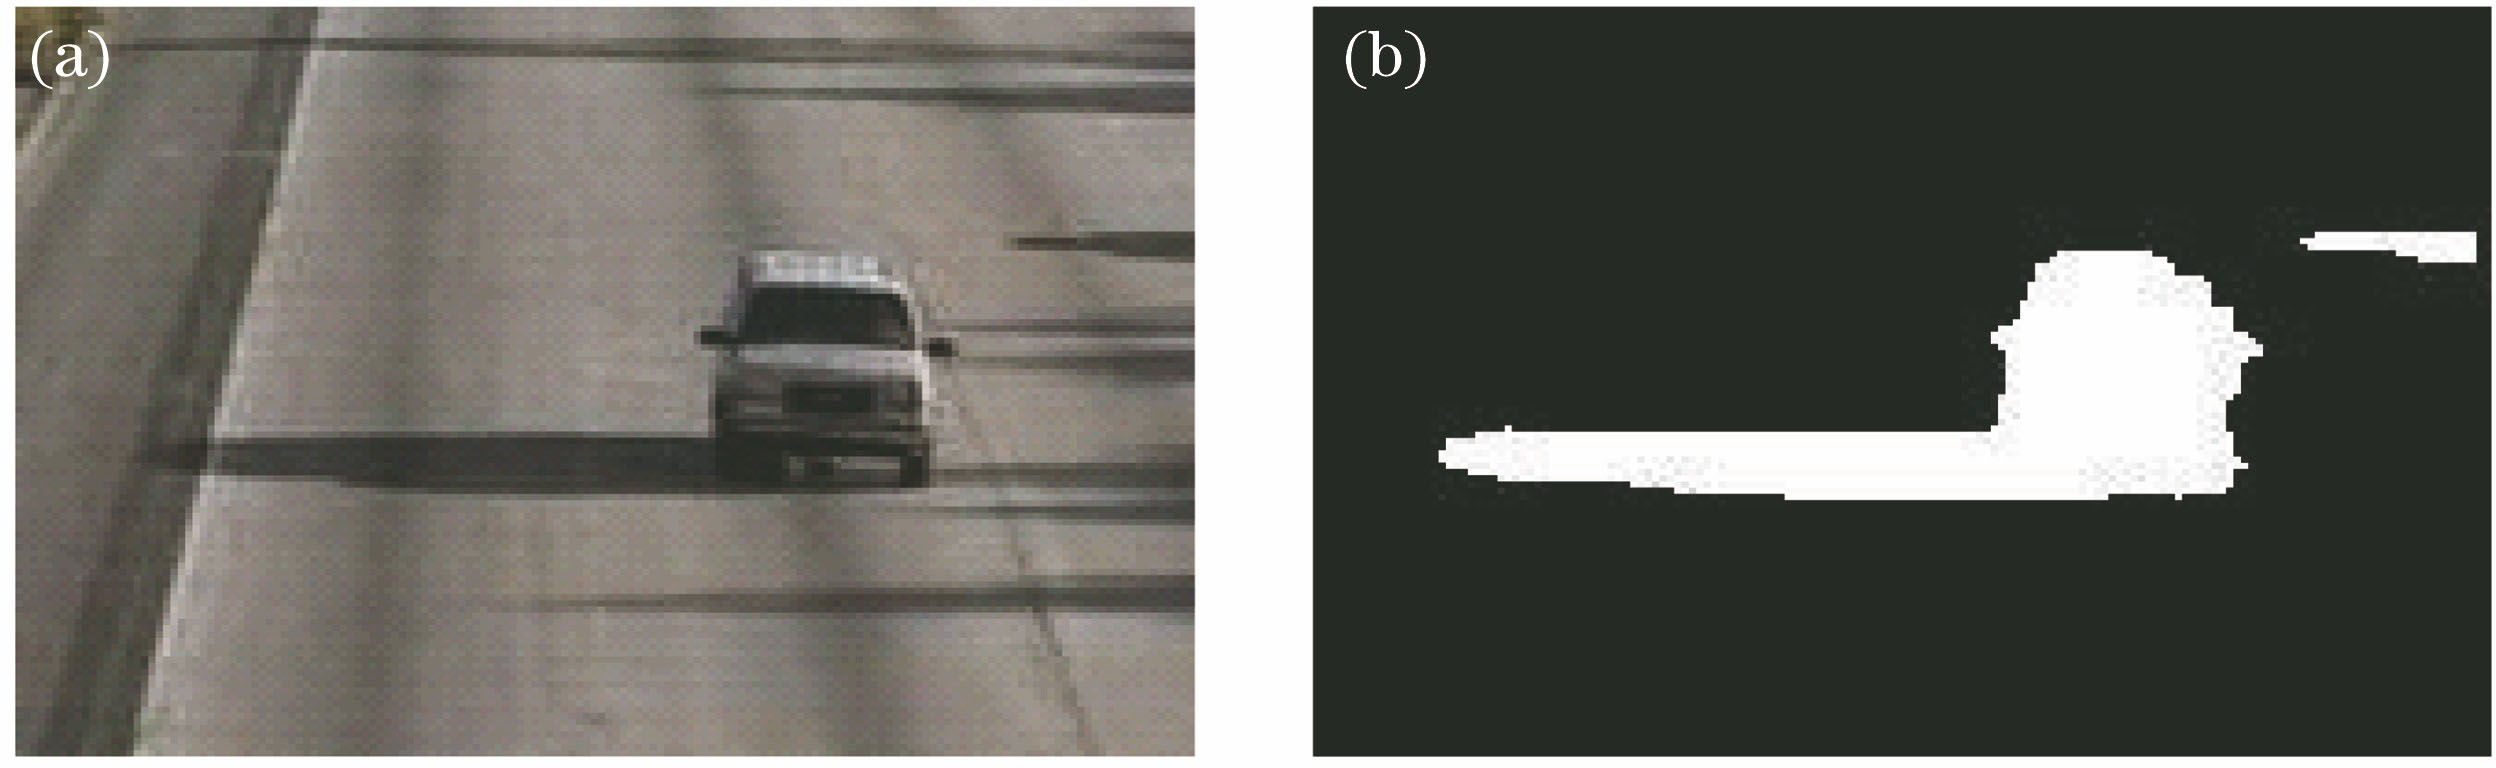 Moving target detection. (a) Original image; (b) foreground target area